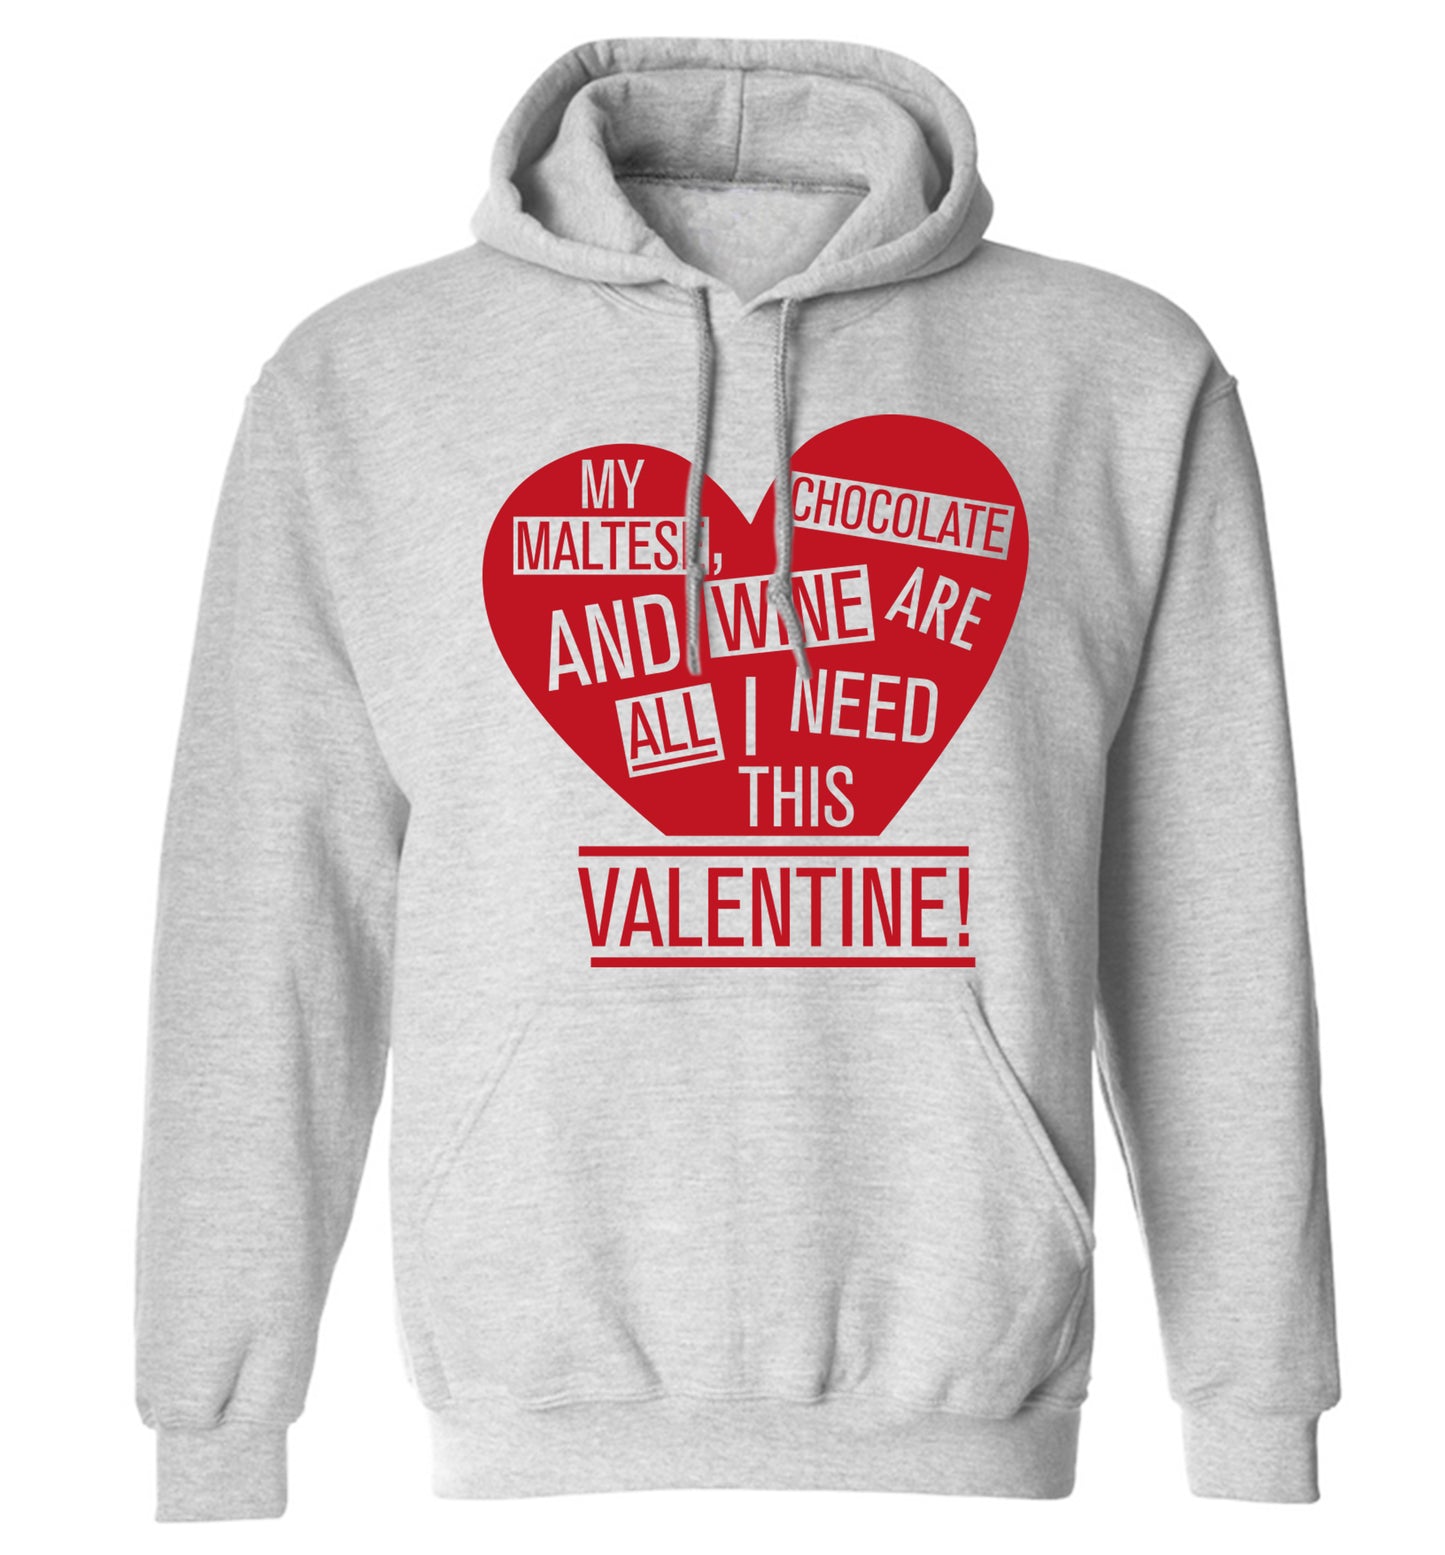 My maltese, chocolate and wine are all I need this valentine! adults unisex grey hoodie 2XL